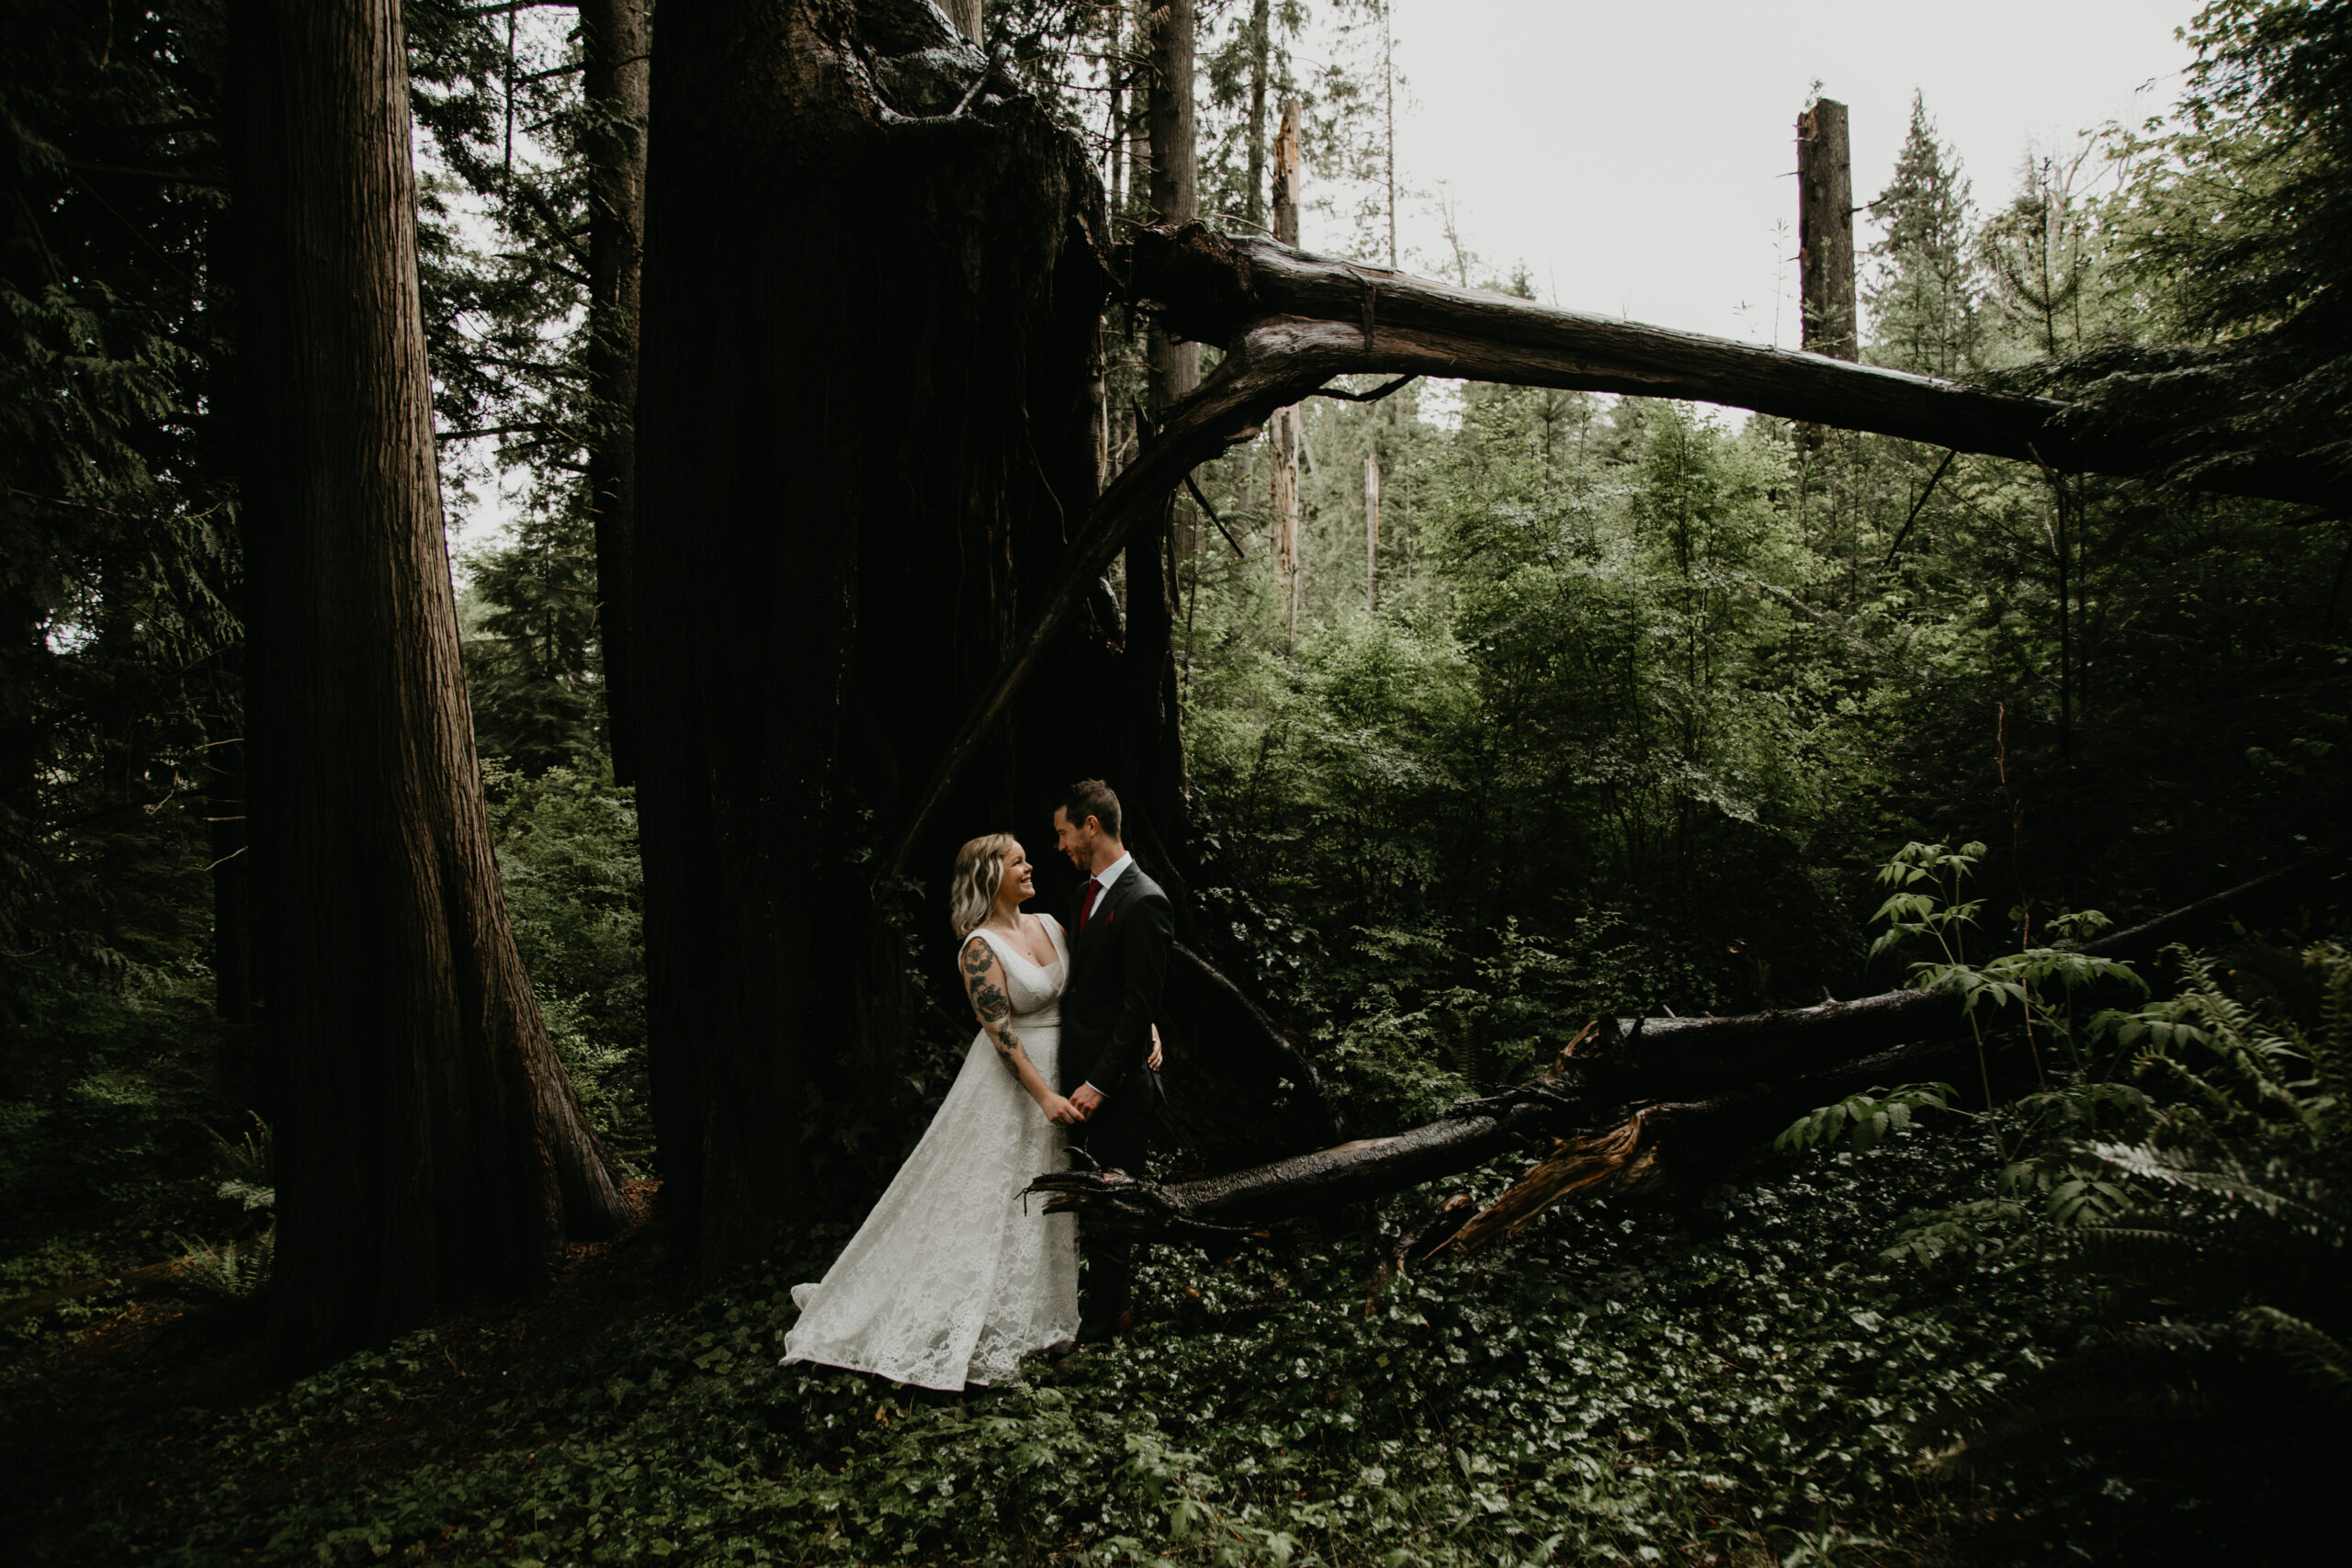 Elope at Cates Park with Young Hip & Married Vancouver officiants and marriage commissioners